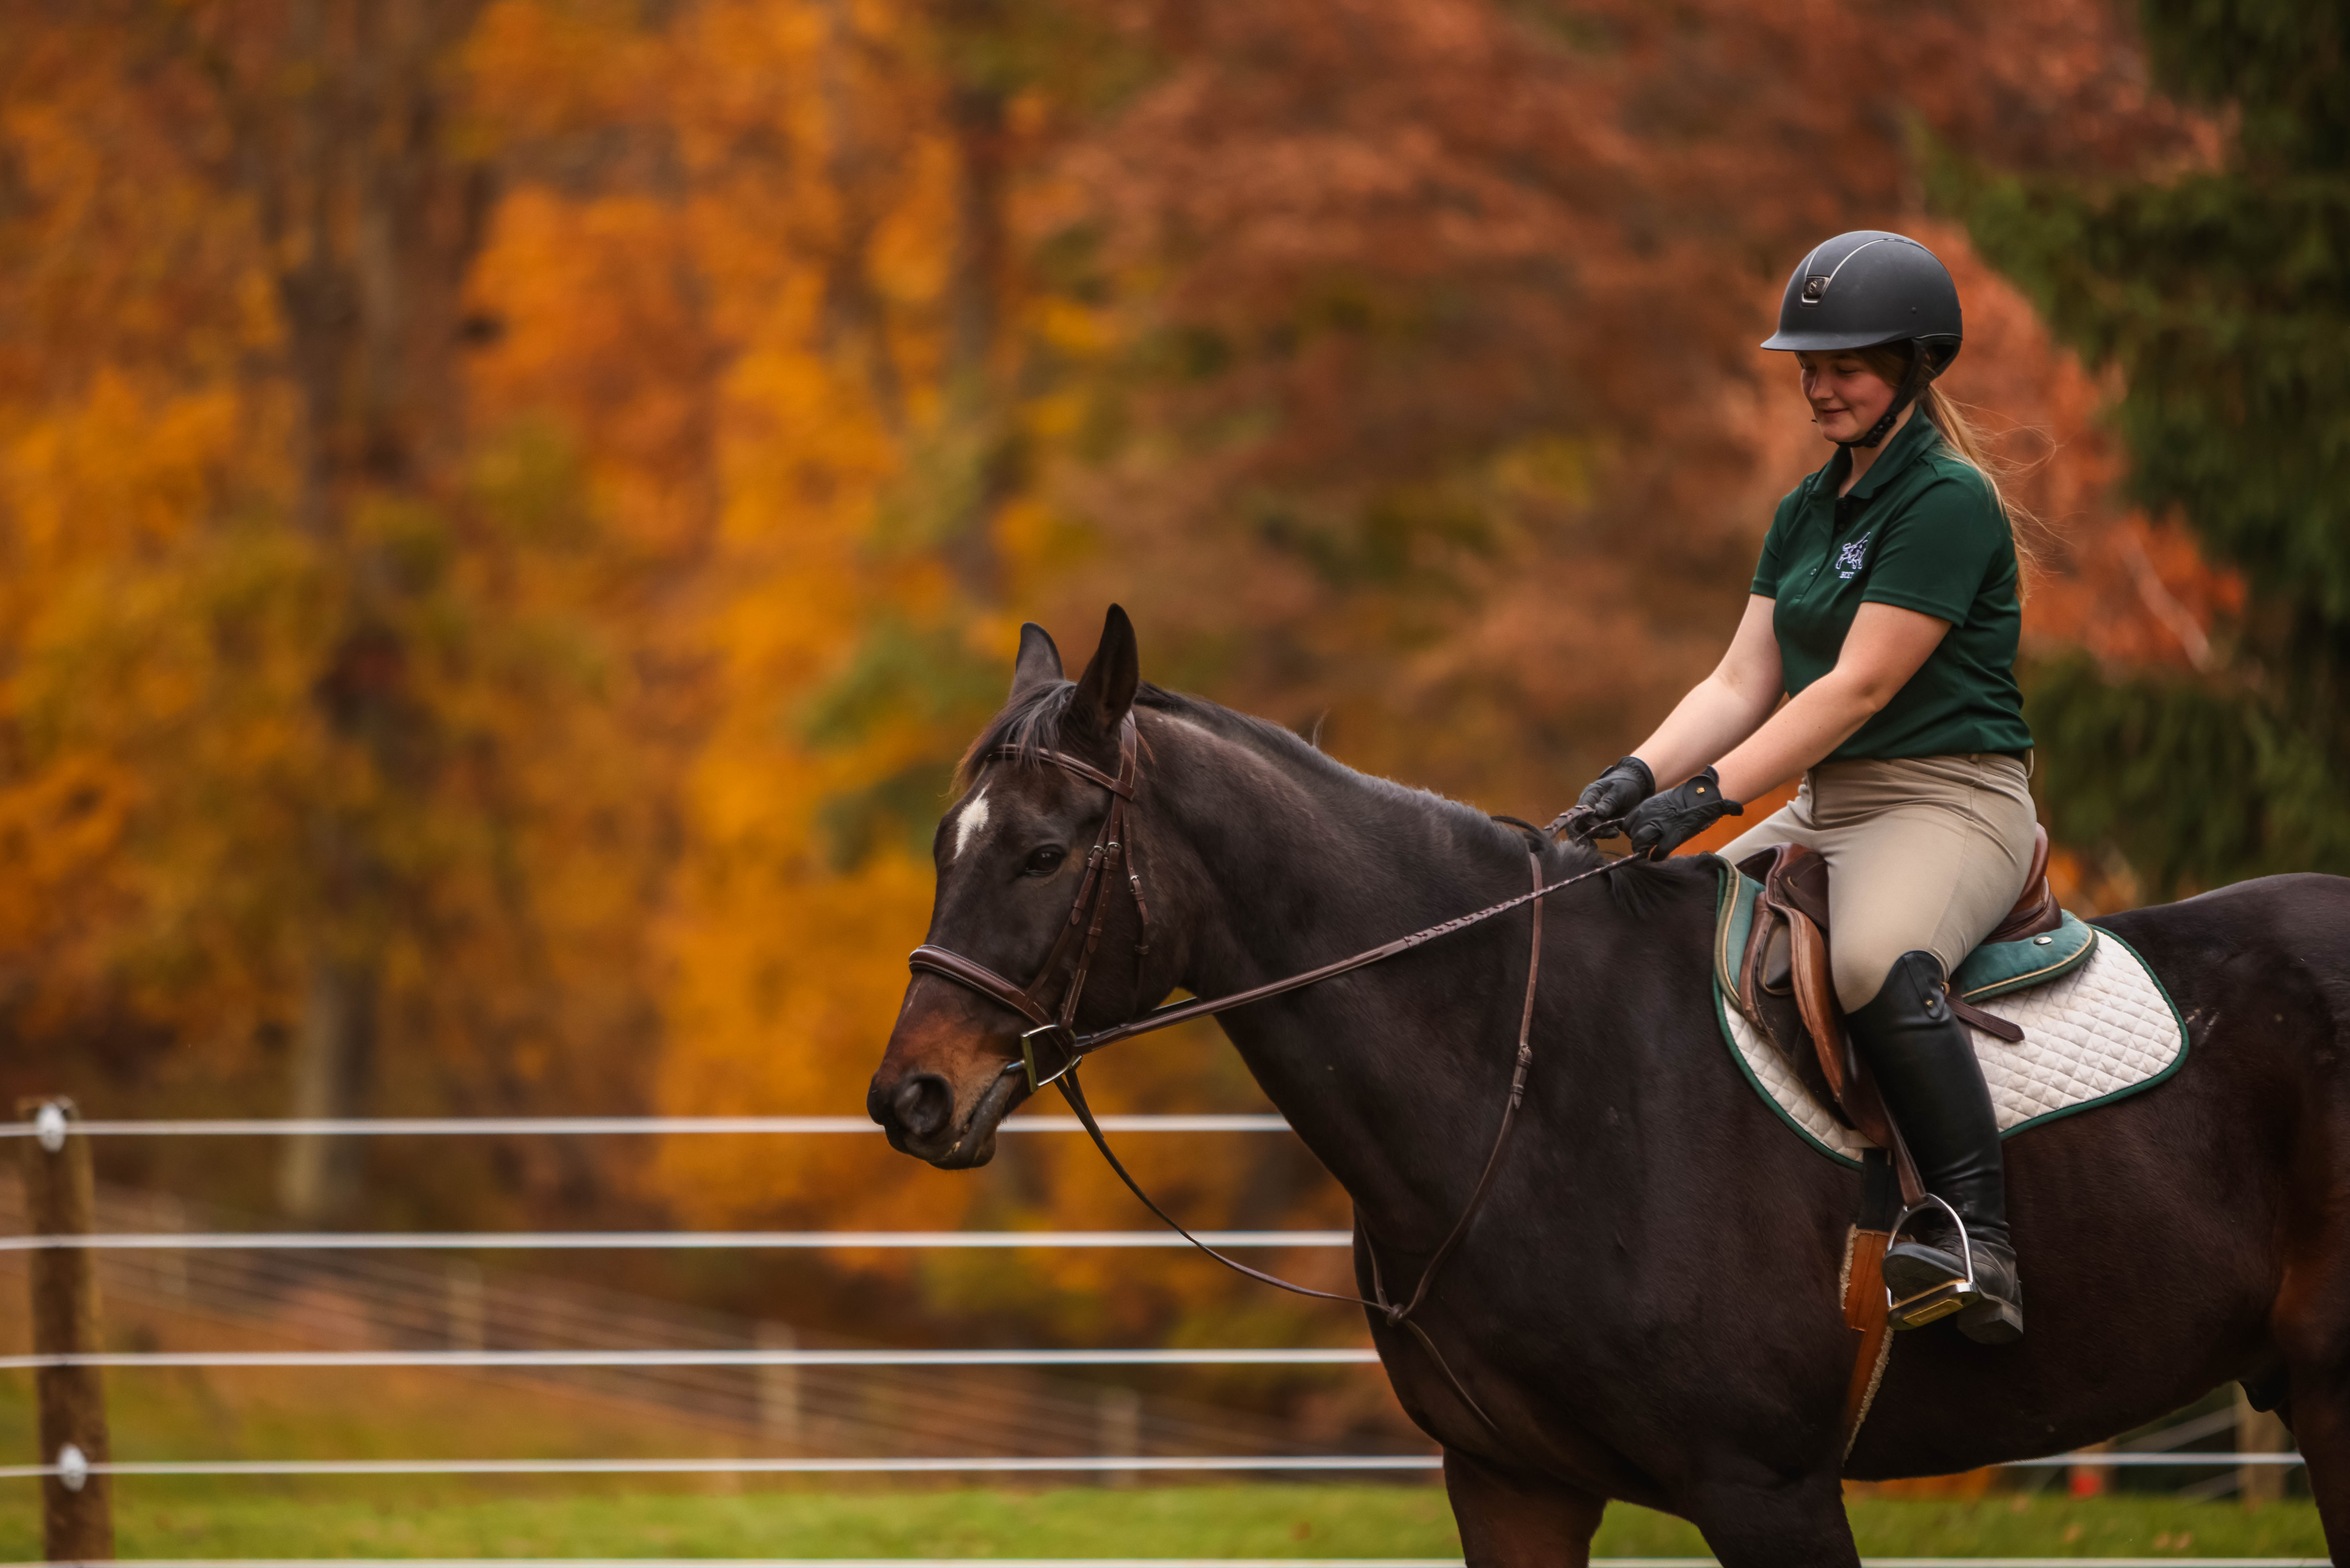 BCET returns to Oglebay Stables for their annual home show